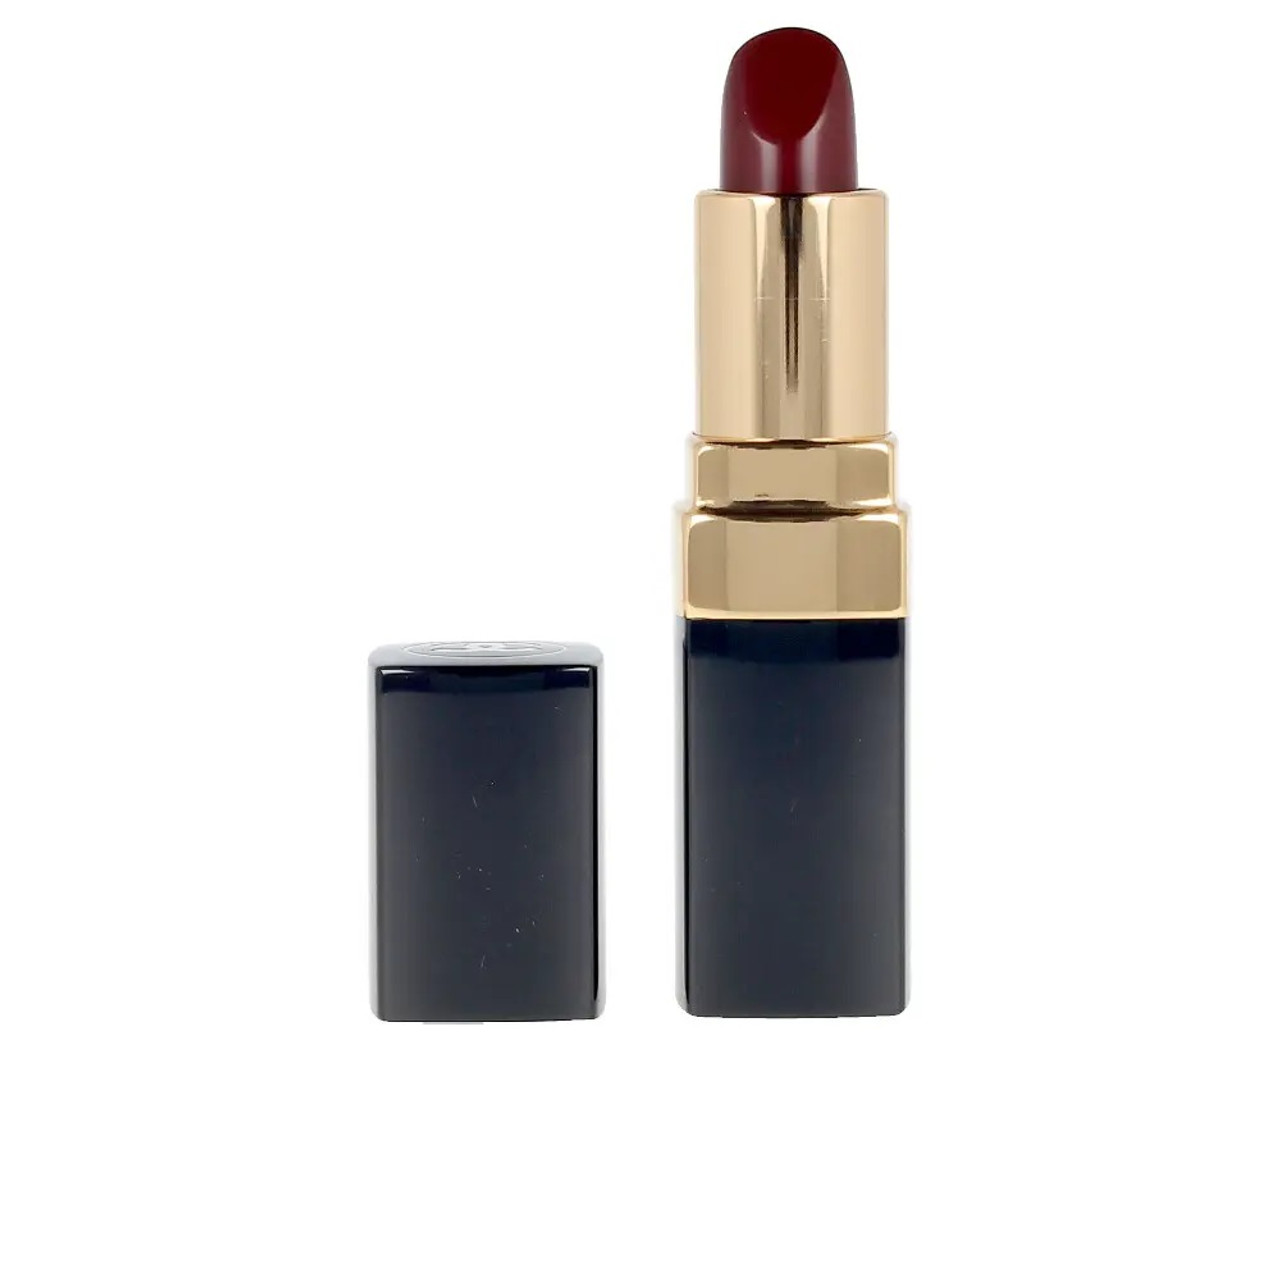 CHANEL ROUGE COCO 0.12 ULTRA HYDRATING LIP COLOUR #494 ATTRACTION